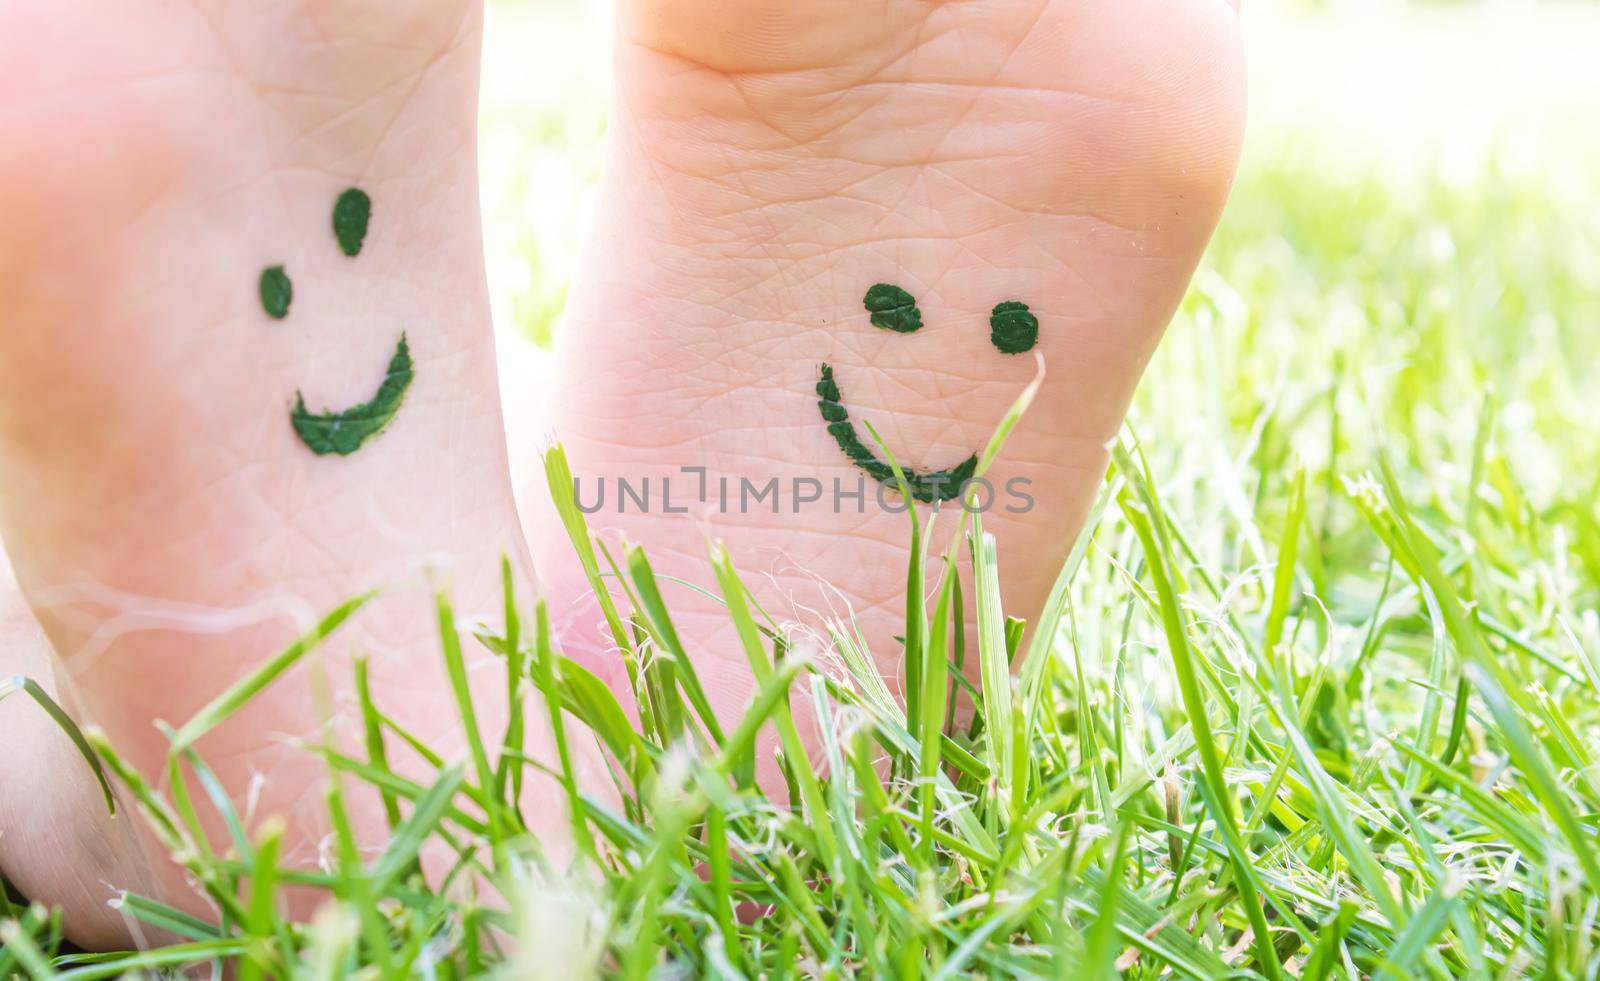 Children's feet with a pattern of paints smile on the green grass. Selective focus. nature.